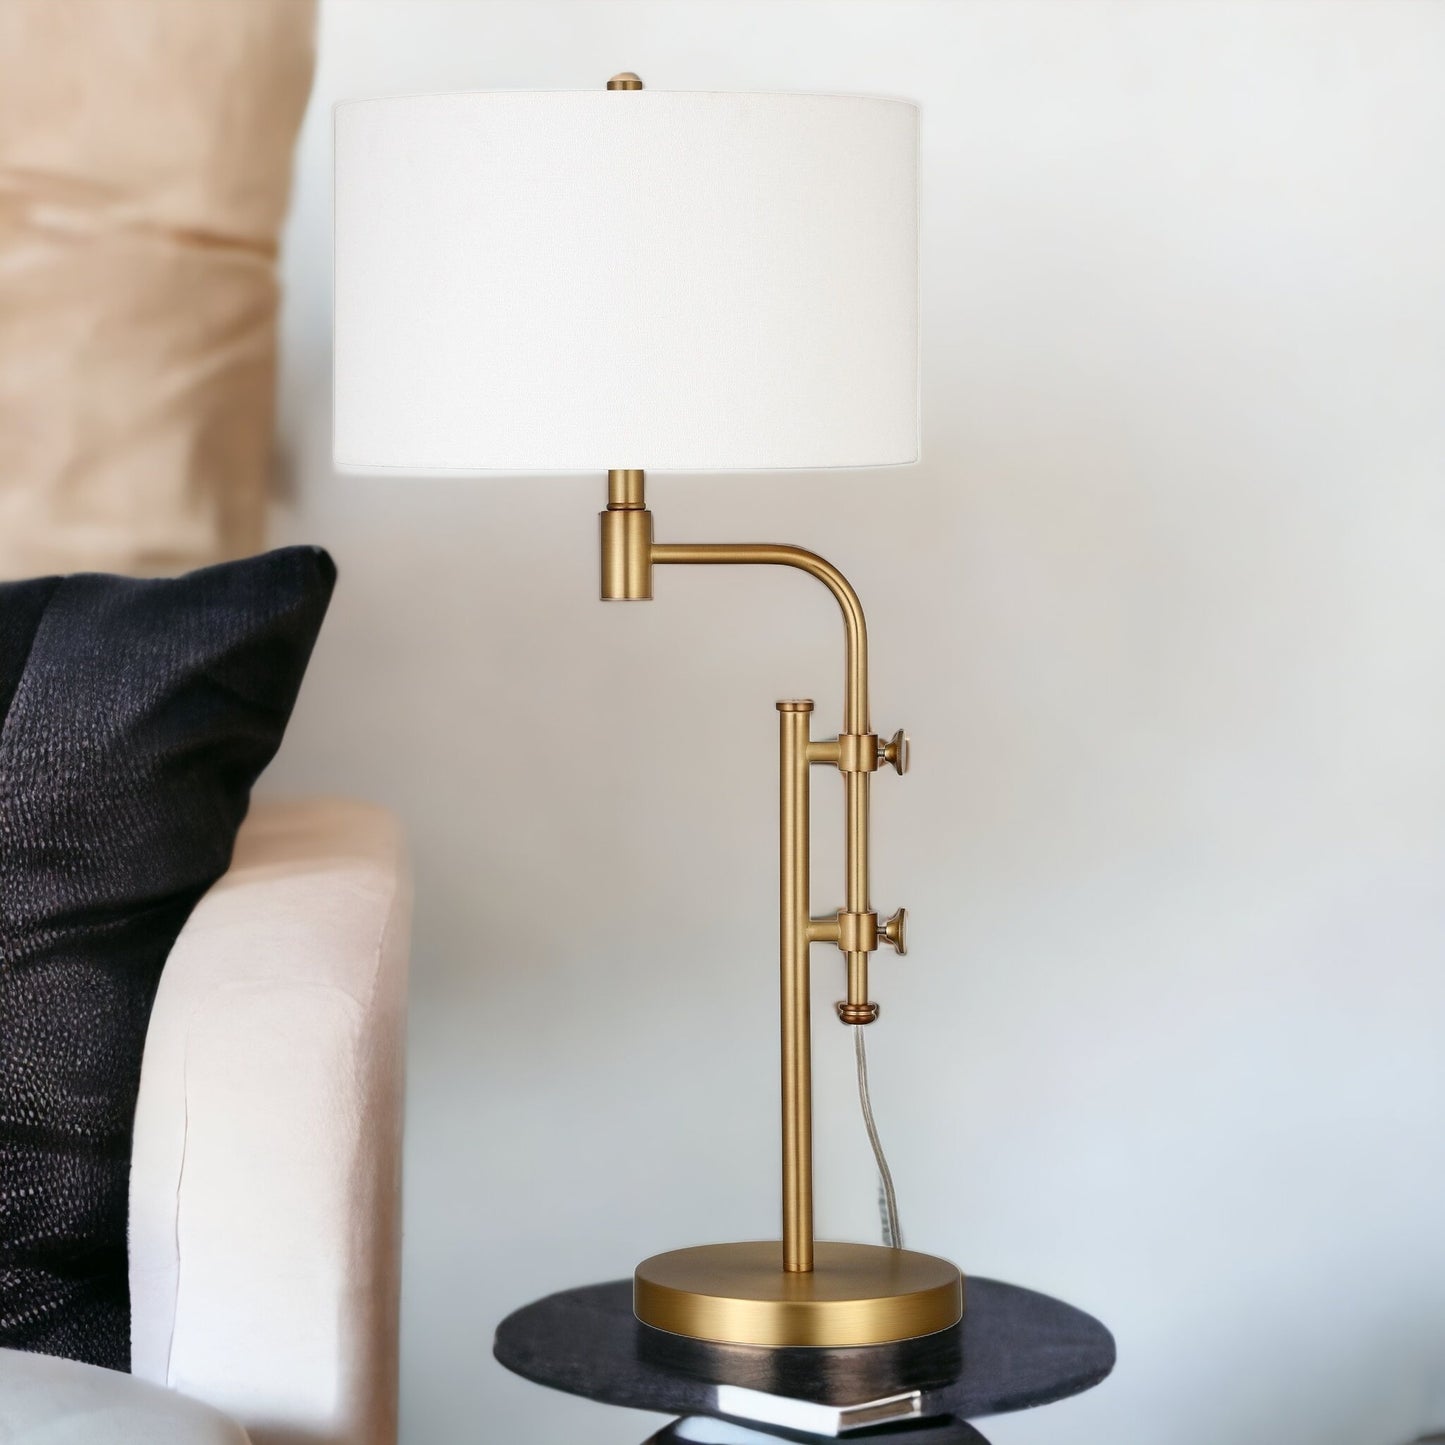 32" Brass Metal Adjustable Table Lamp With White Drum Shade